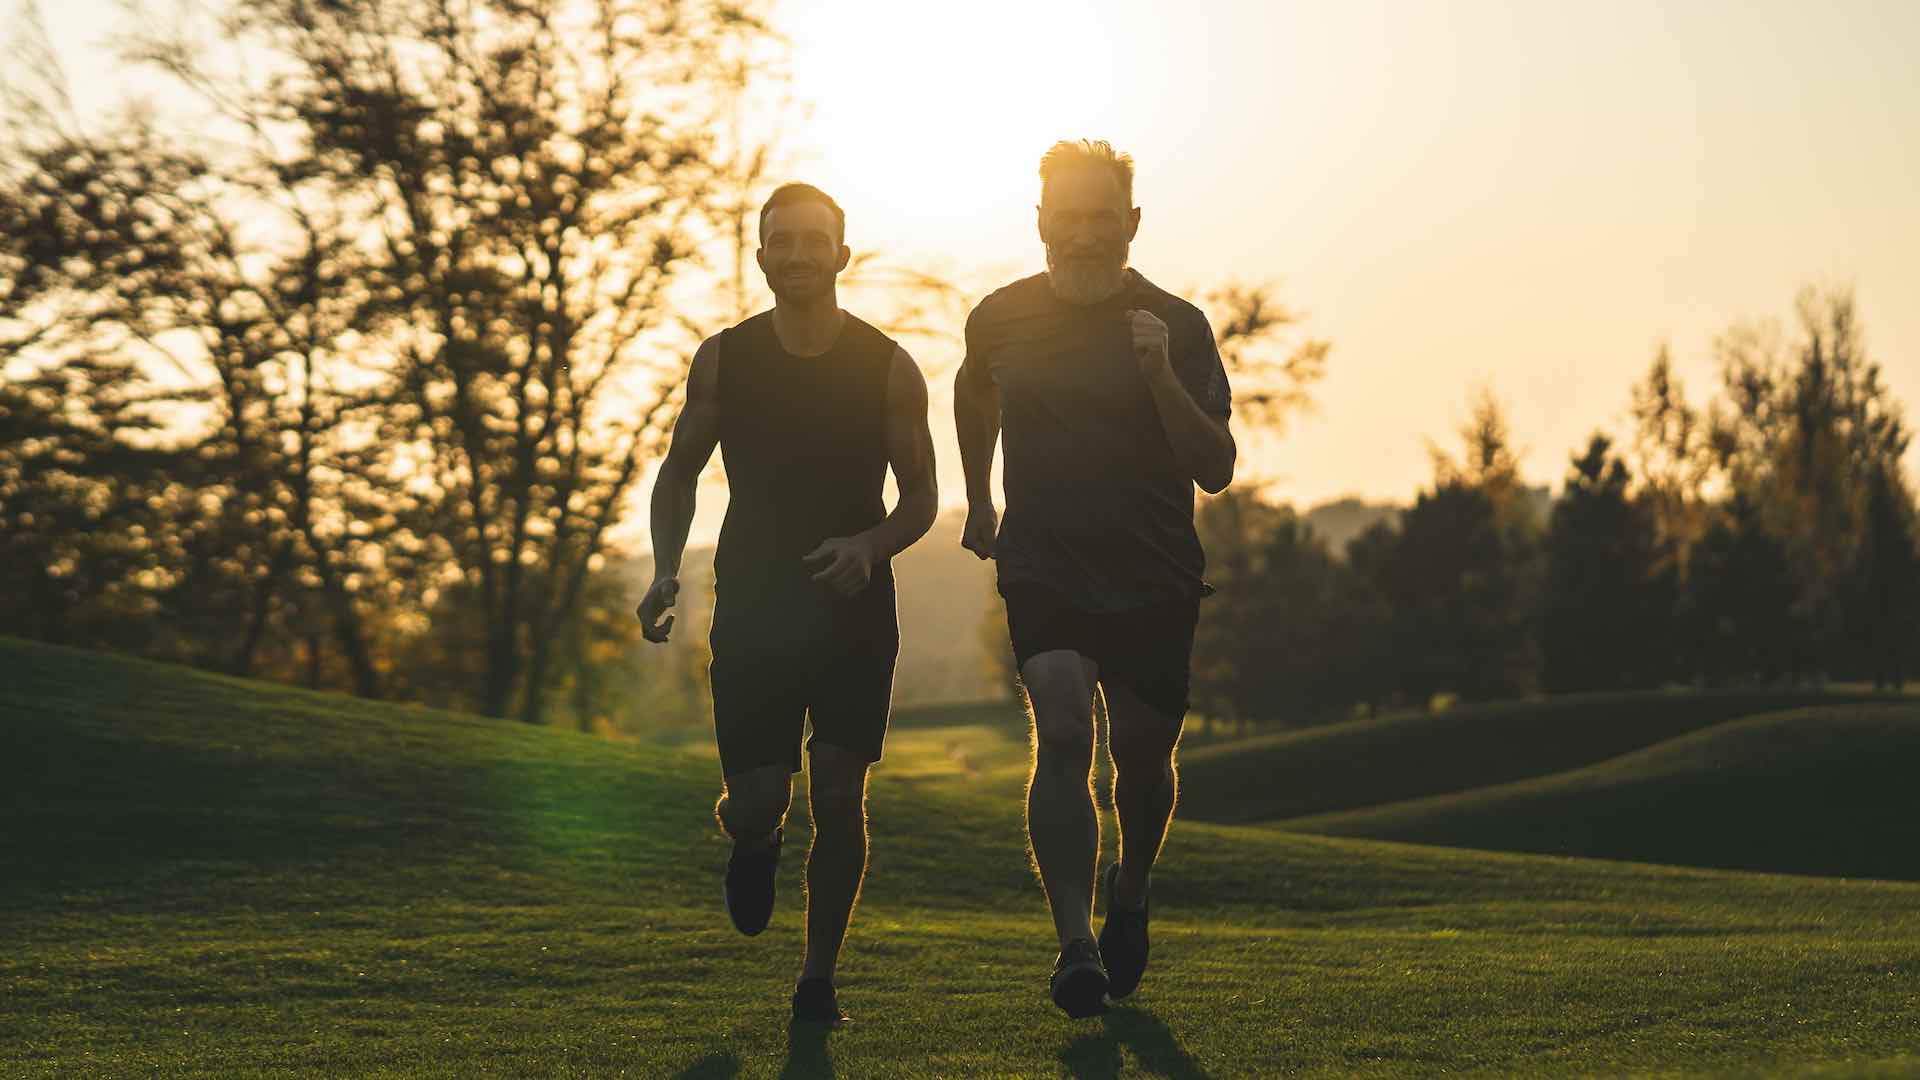 Evening workouts linked to 61% lower mortality risk